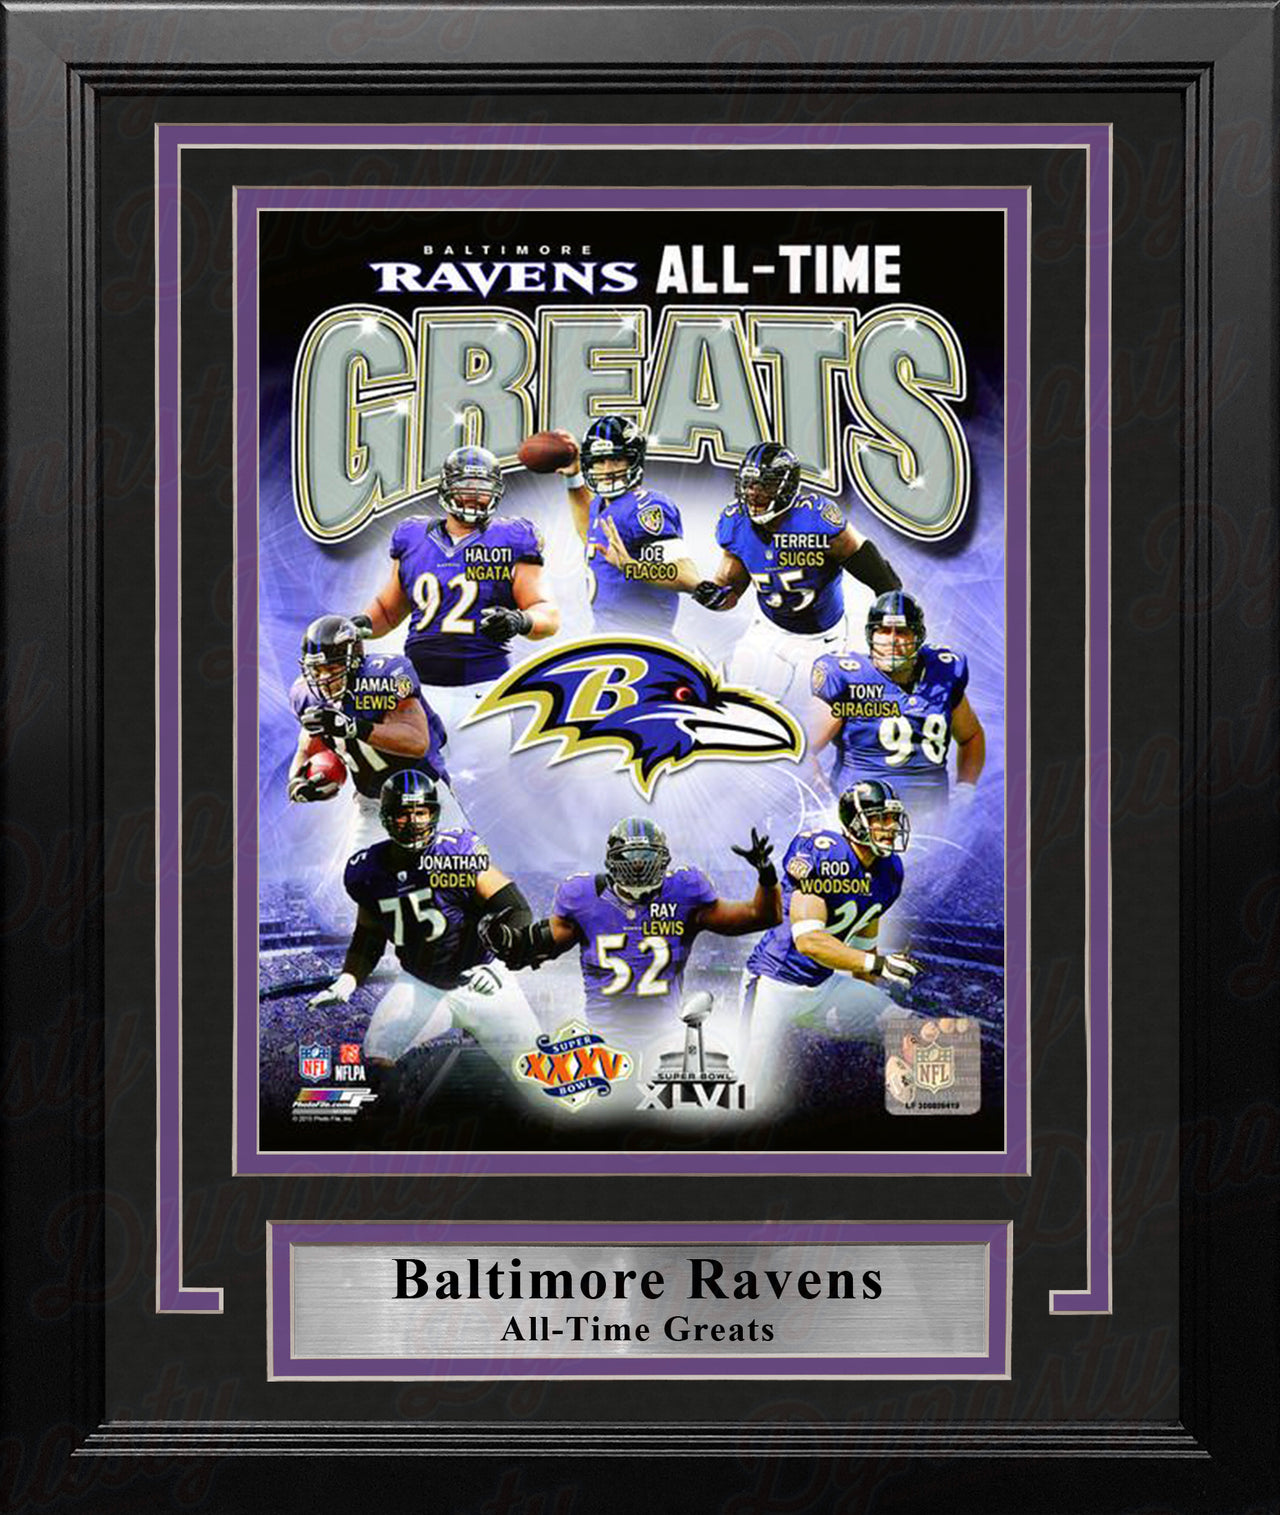 Baltimore Ravens All-Time Greats 8" x 10" Framed Football Photo - Dynasty Sports & Framing 